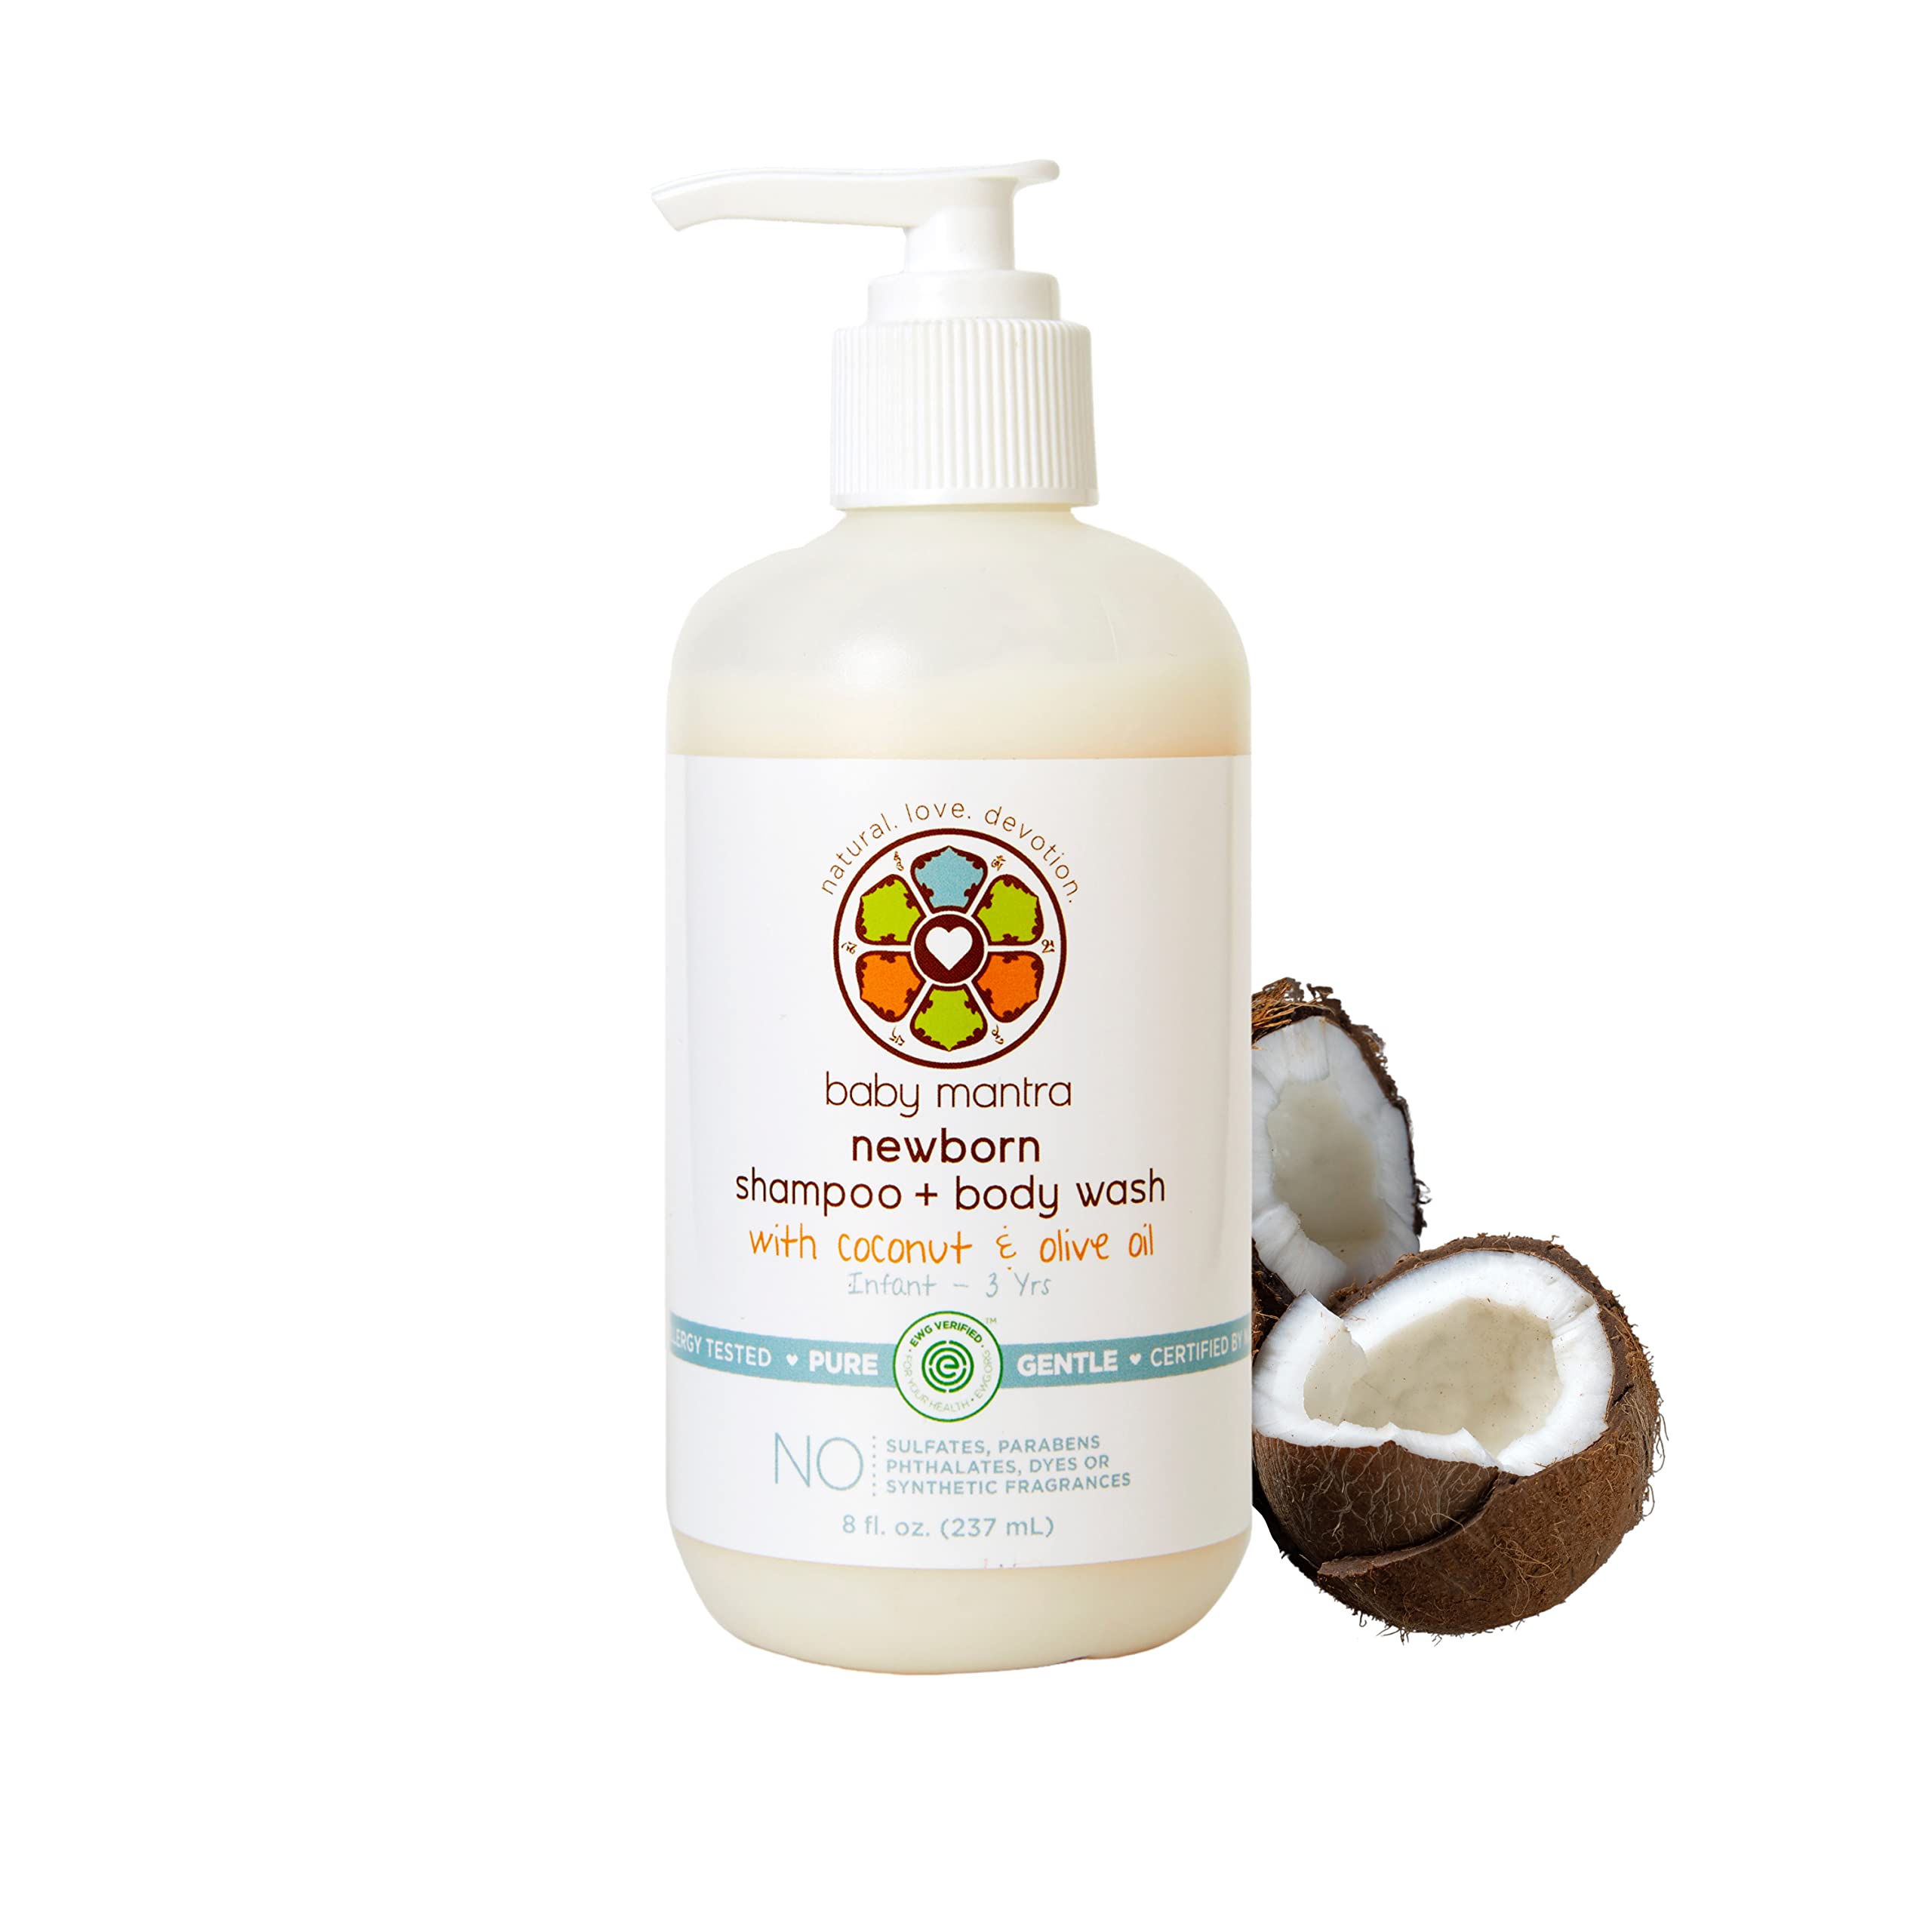 Baby Mantra 2-in-1 Shampoo and Body Wash - EWG Verified Bath Soap for Newborns, Infants, Toddlers, and Kids with Sensitive Skin, 8 Ounce Pump Bottle